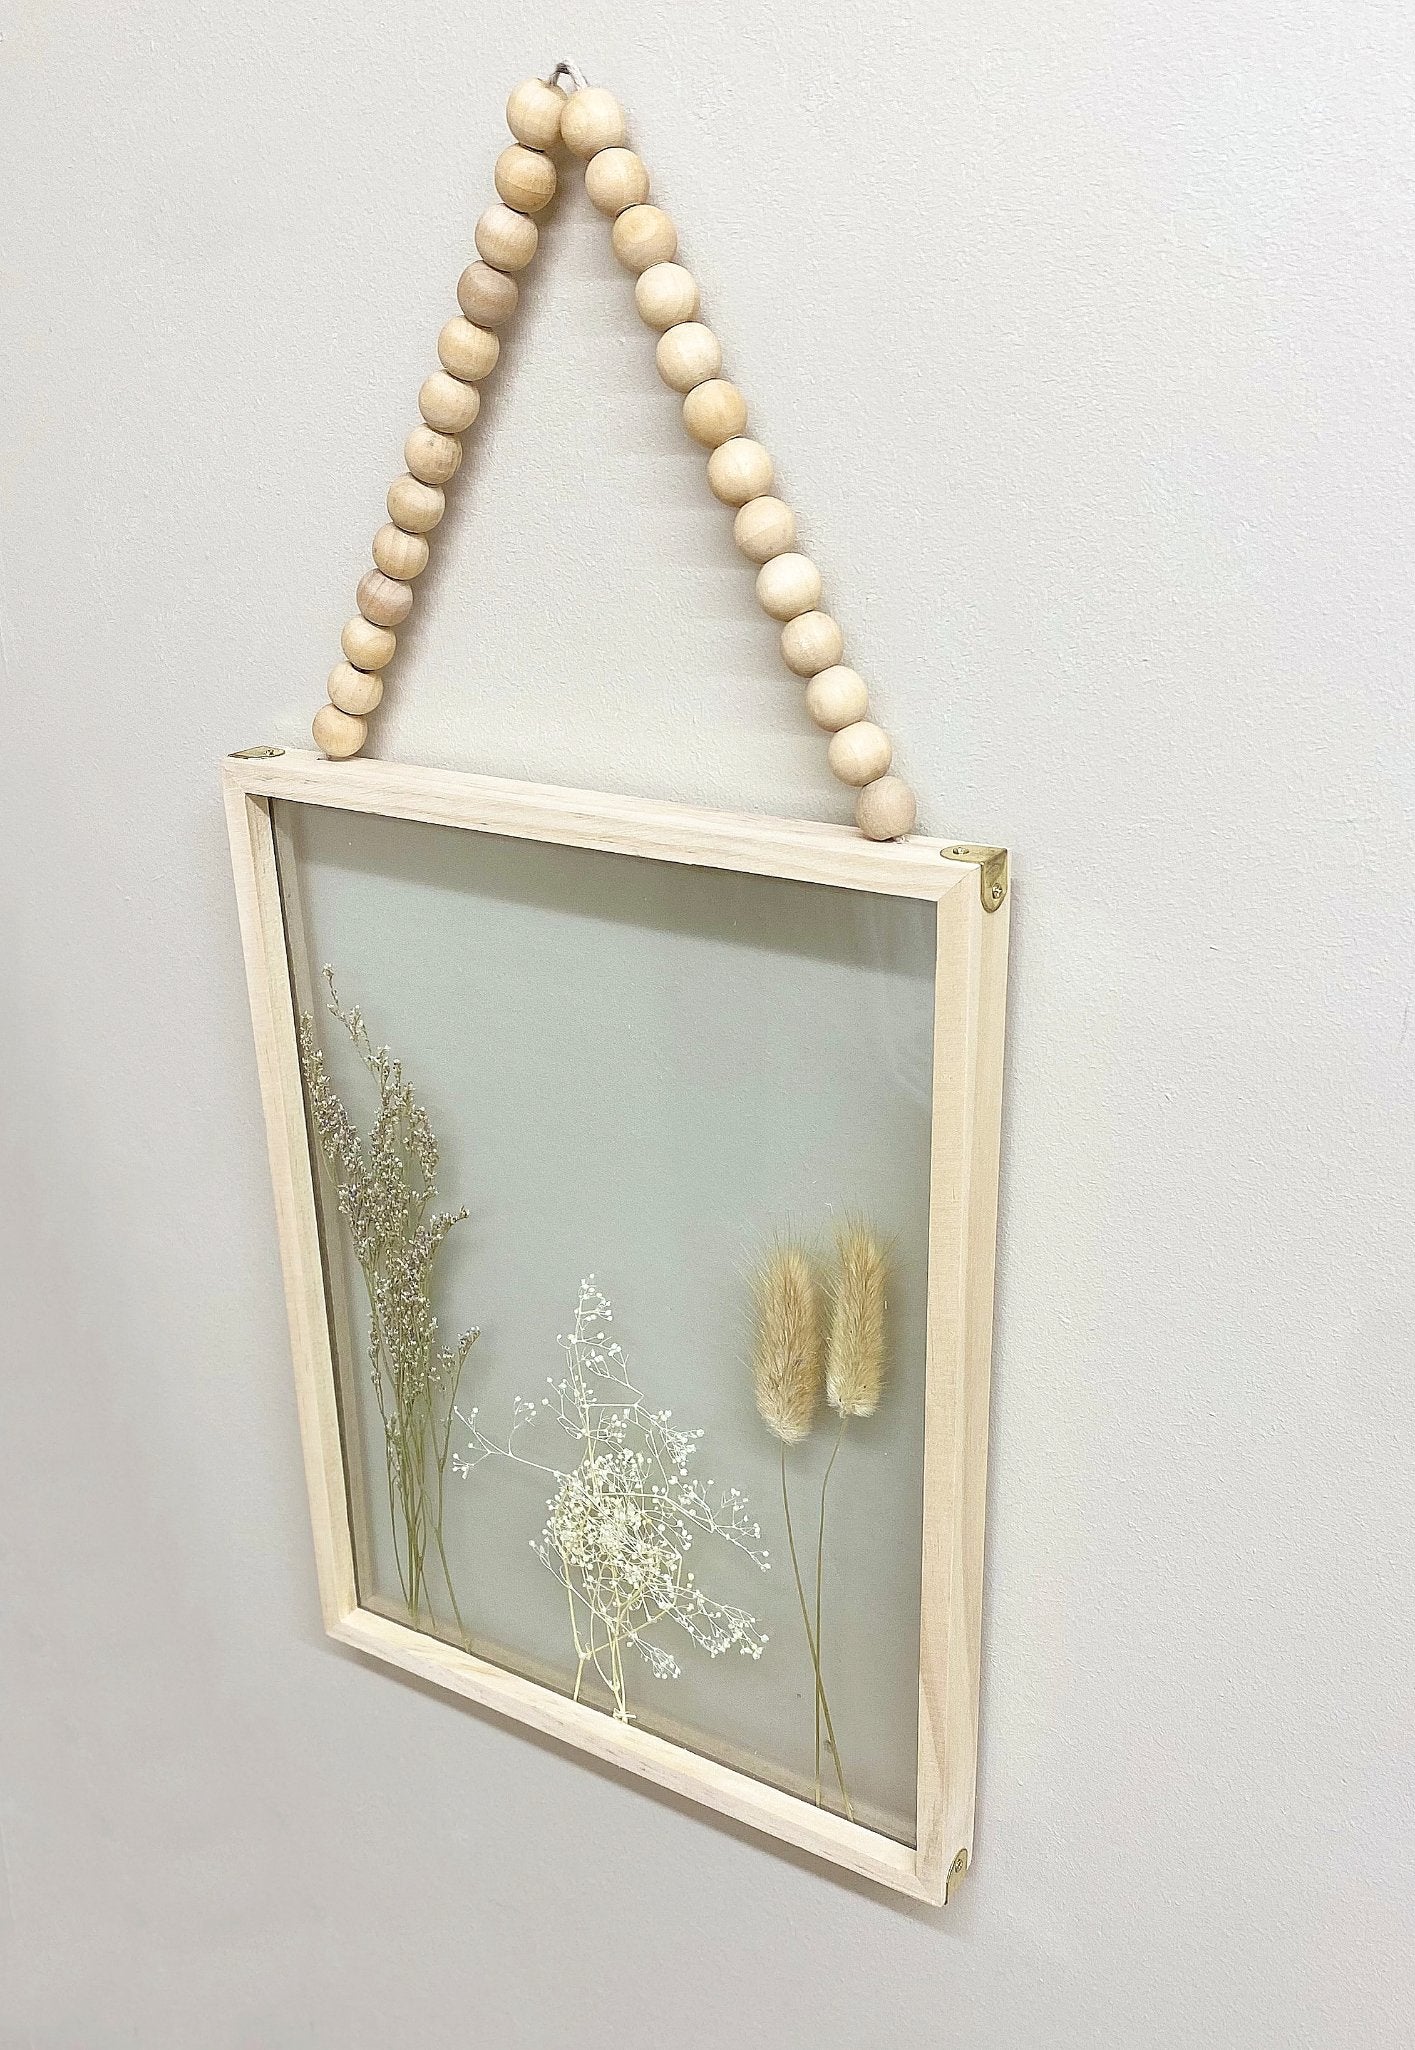 Dried Wildflower Wall Hanging Picture